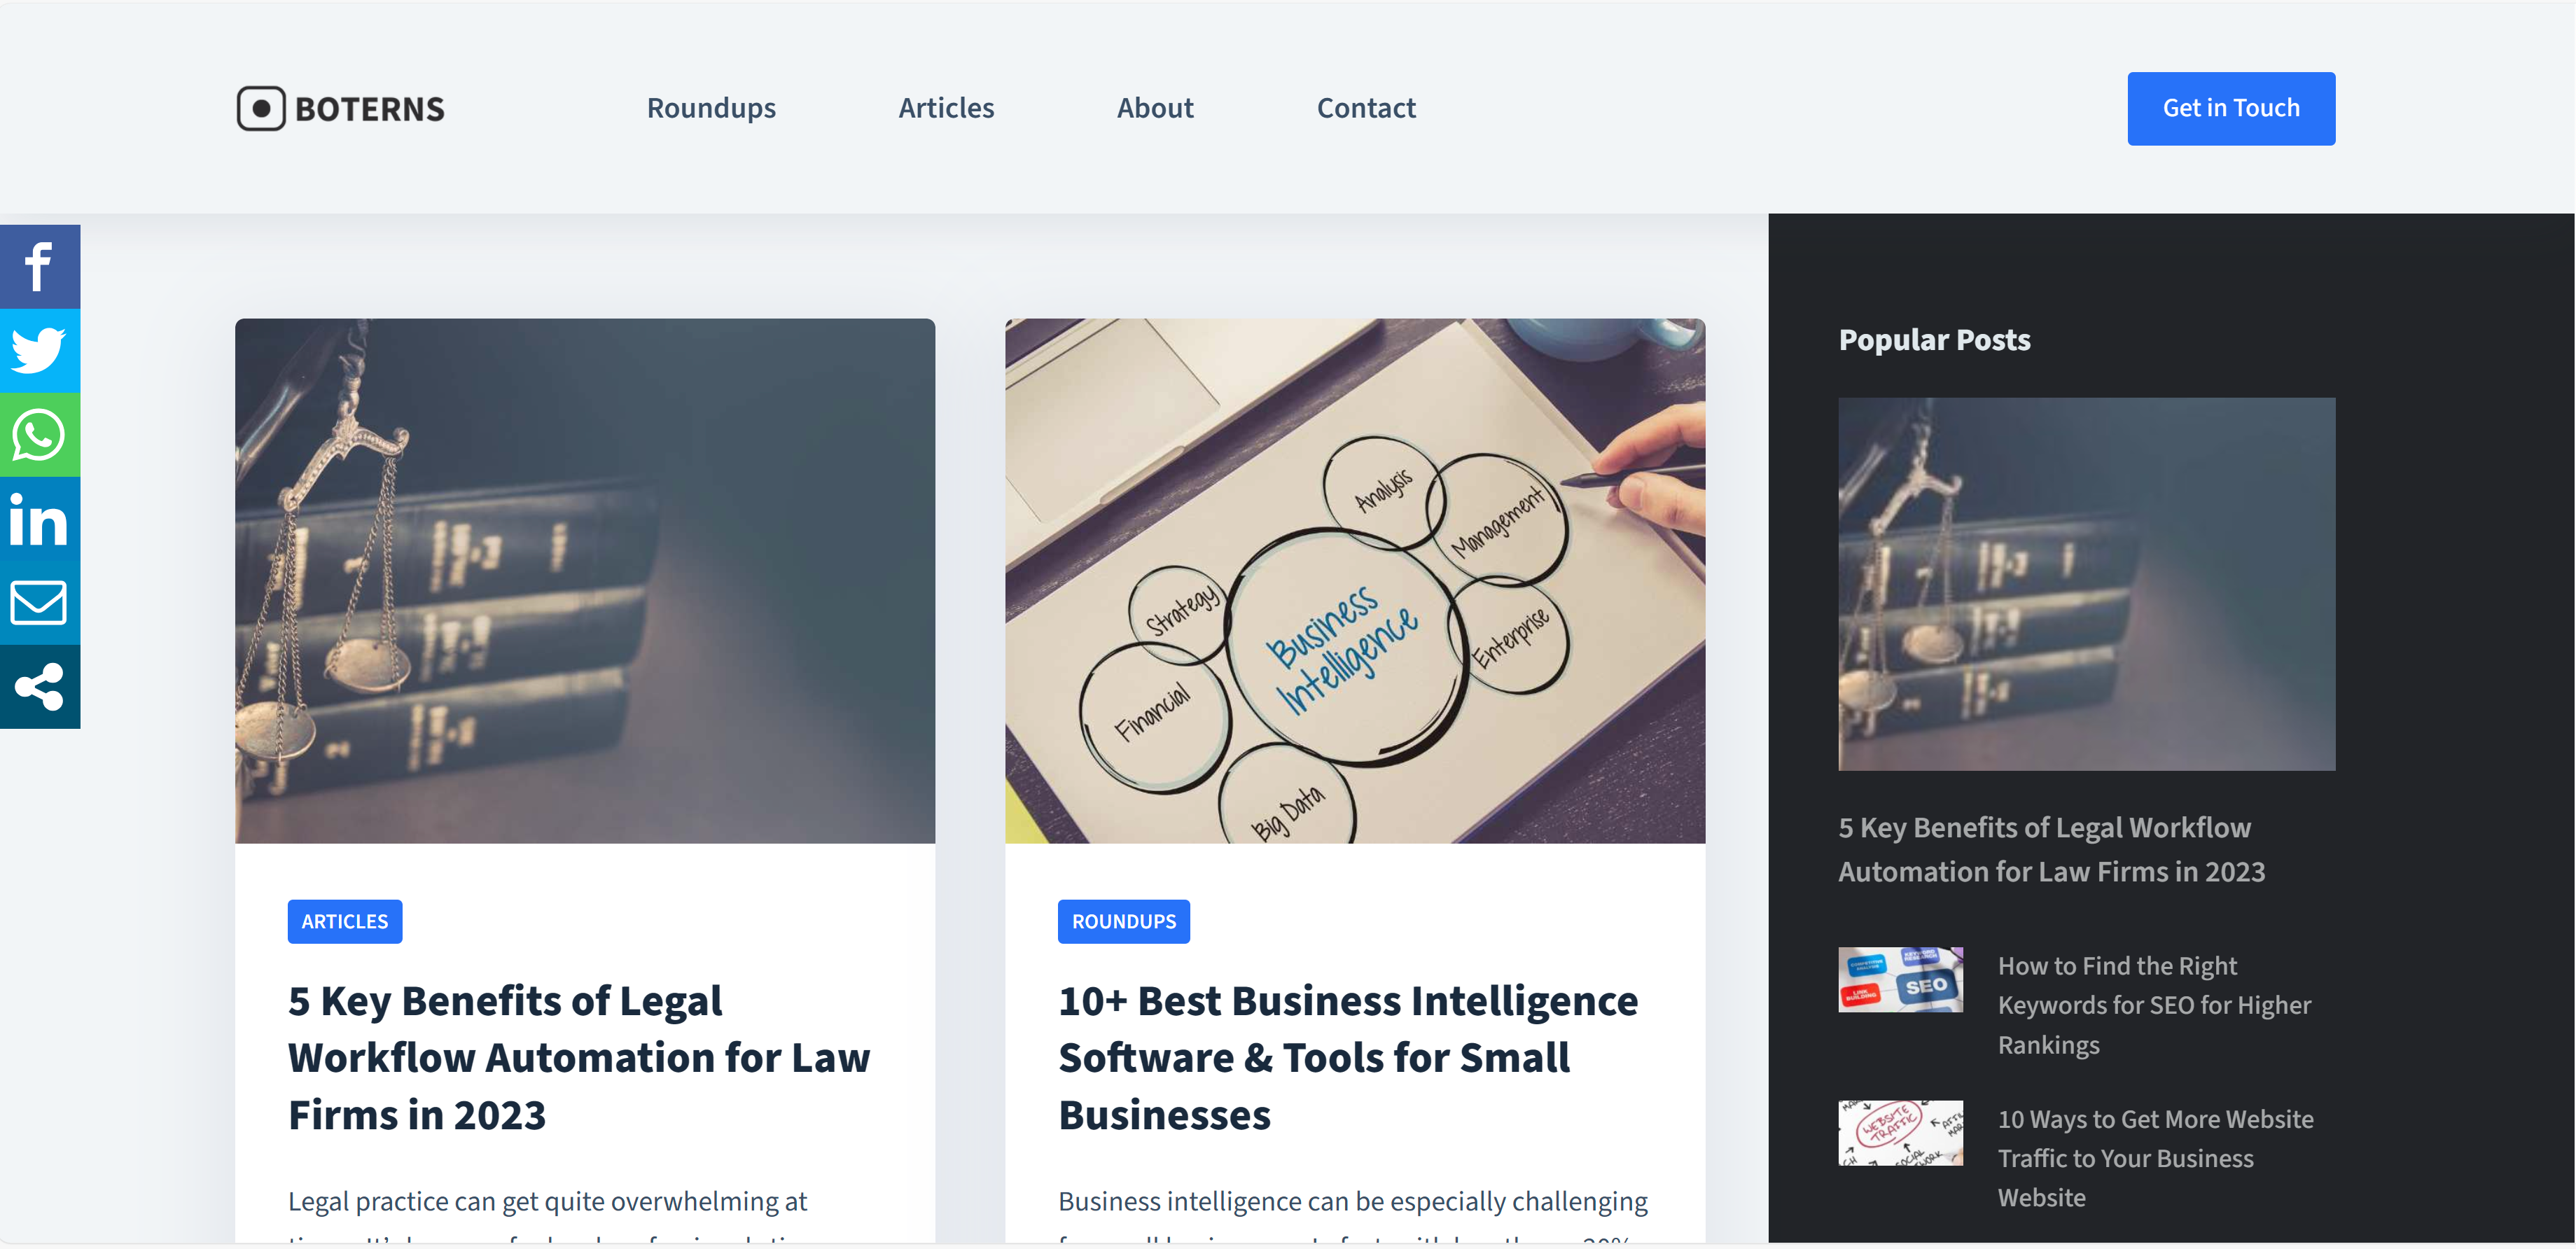 Salessound featured in Best Business Intelligence Software for Small Businesses at Boterns.com.